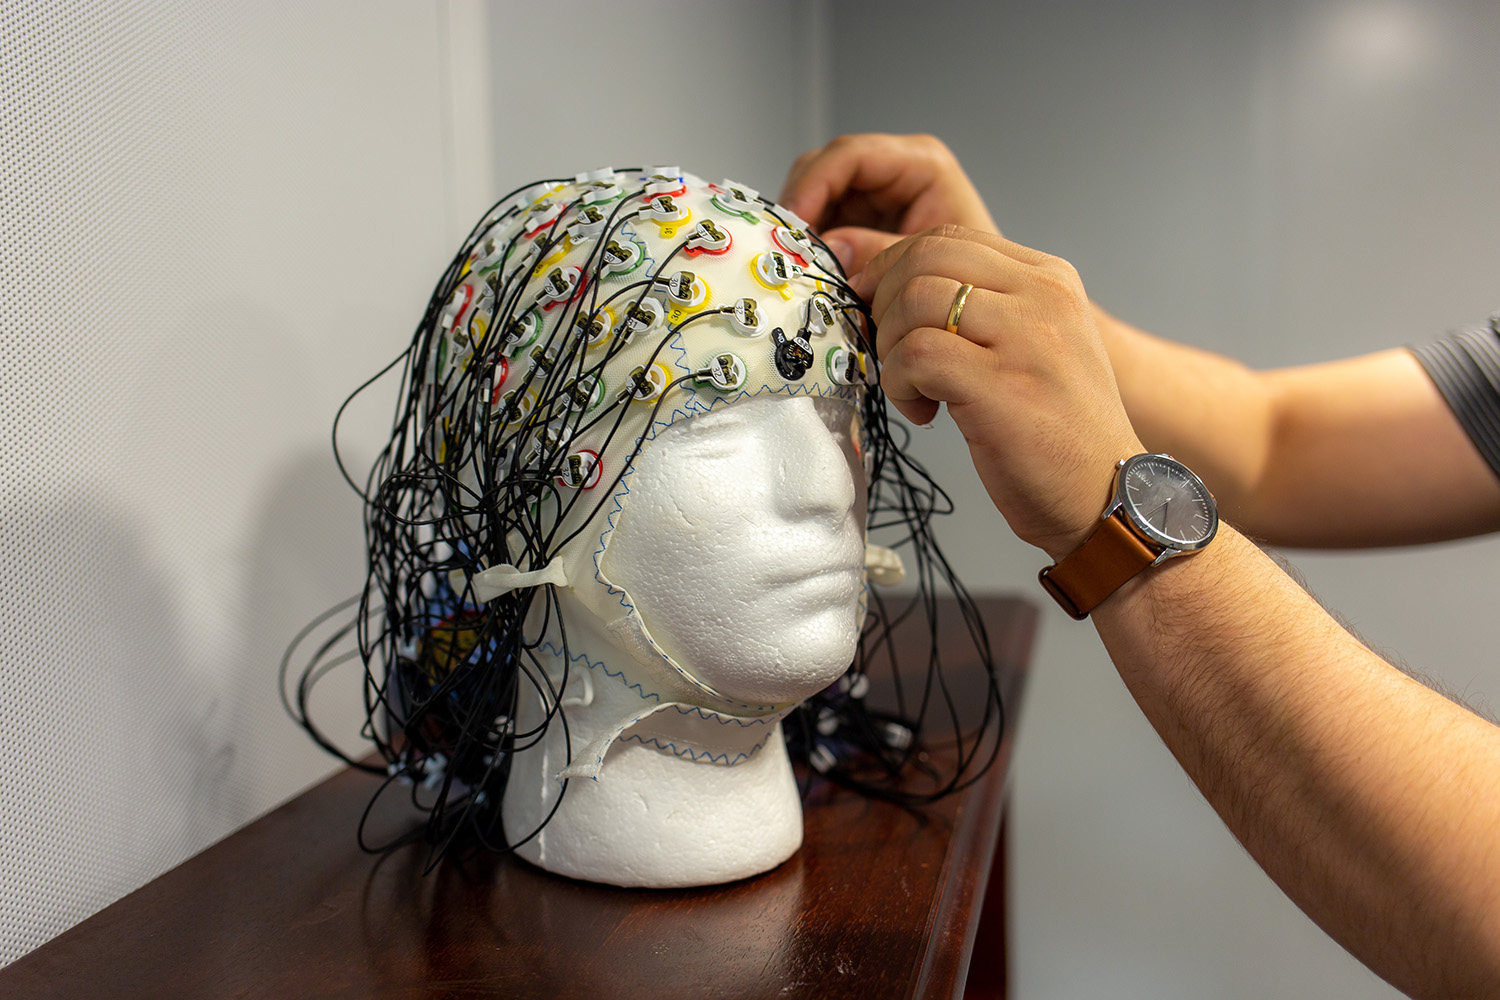 Nicholas Riccardi’s hands hold a cap with diodes used for brain stimulation.